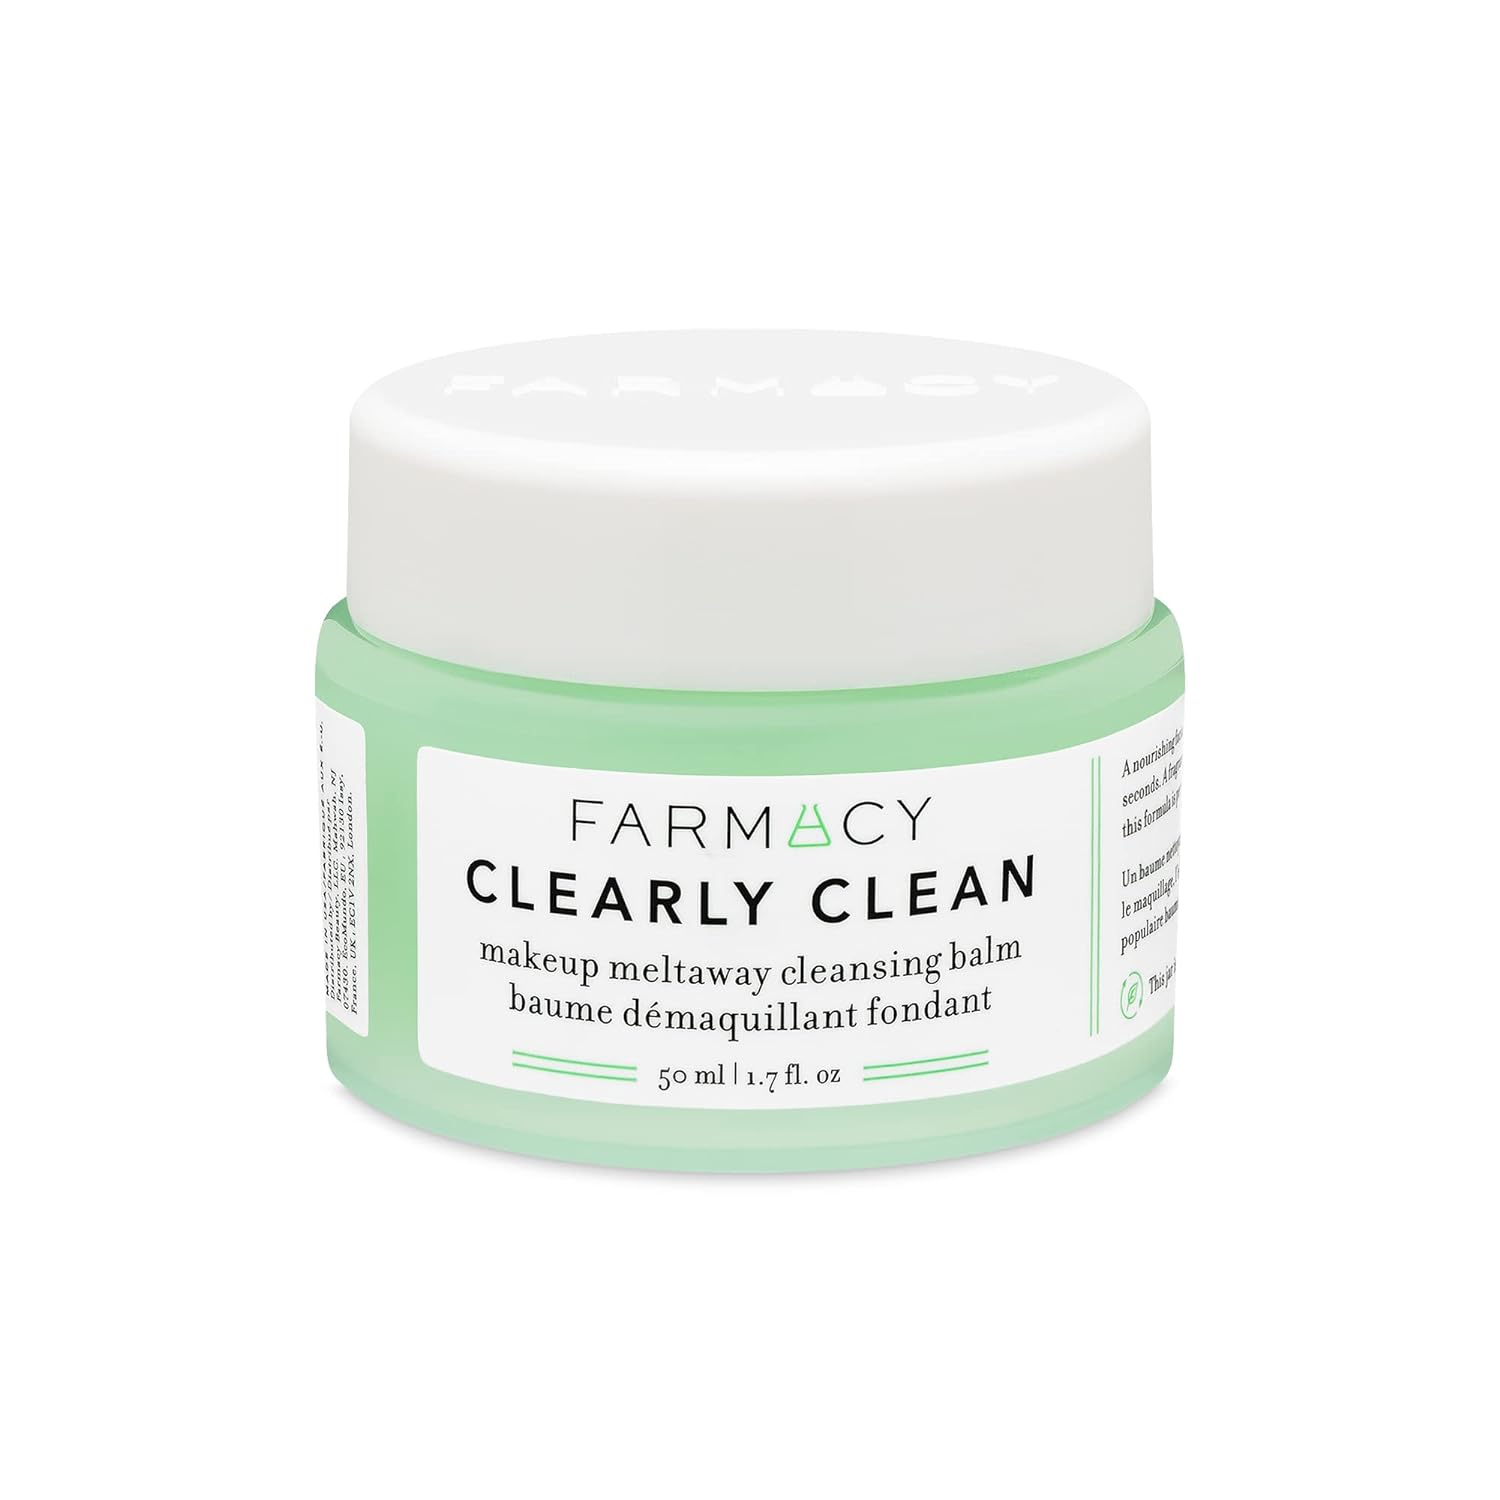 Farmacy Makeup Remover Cleansing Balm - Clearly Clean Fragrance-Free Makeup Melting Balm - Great Balm Cleanser for Sensitive Skin (50ml)